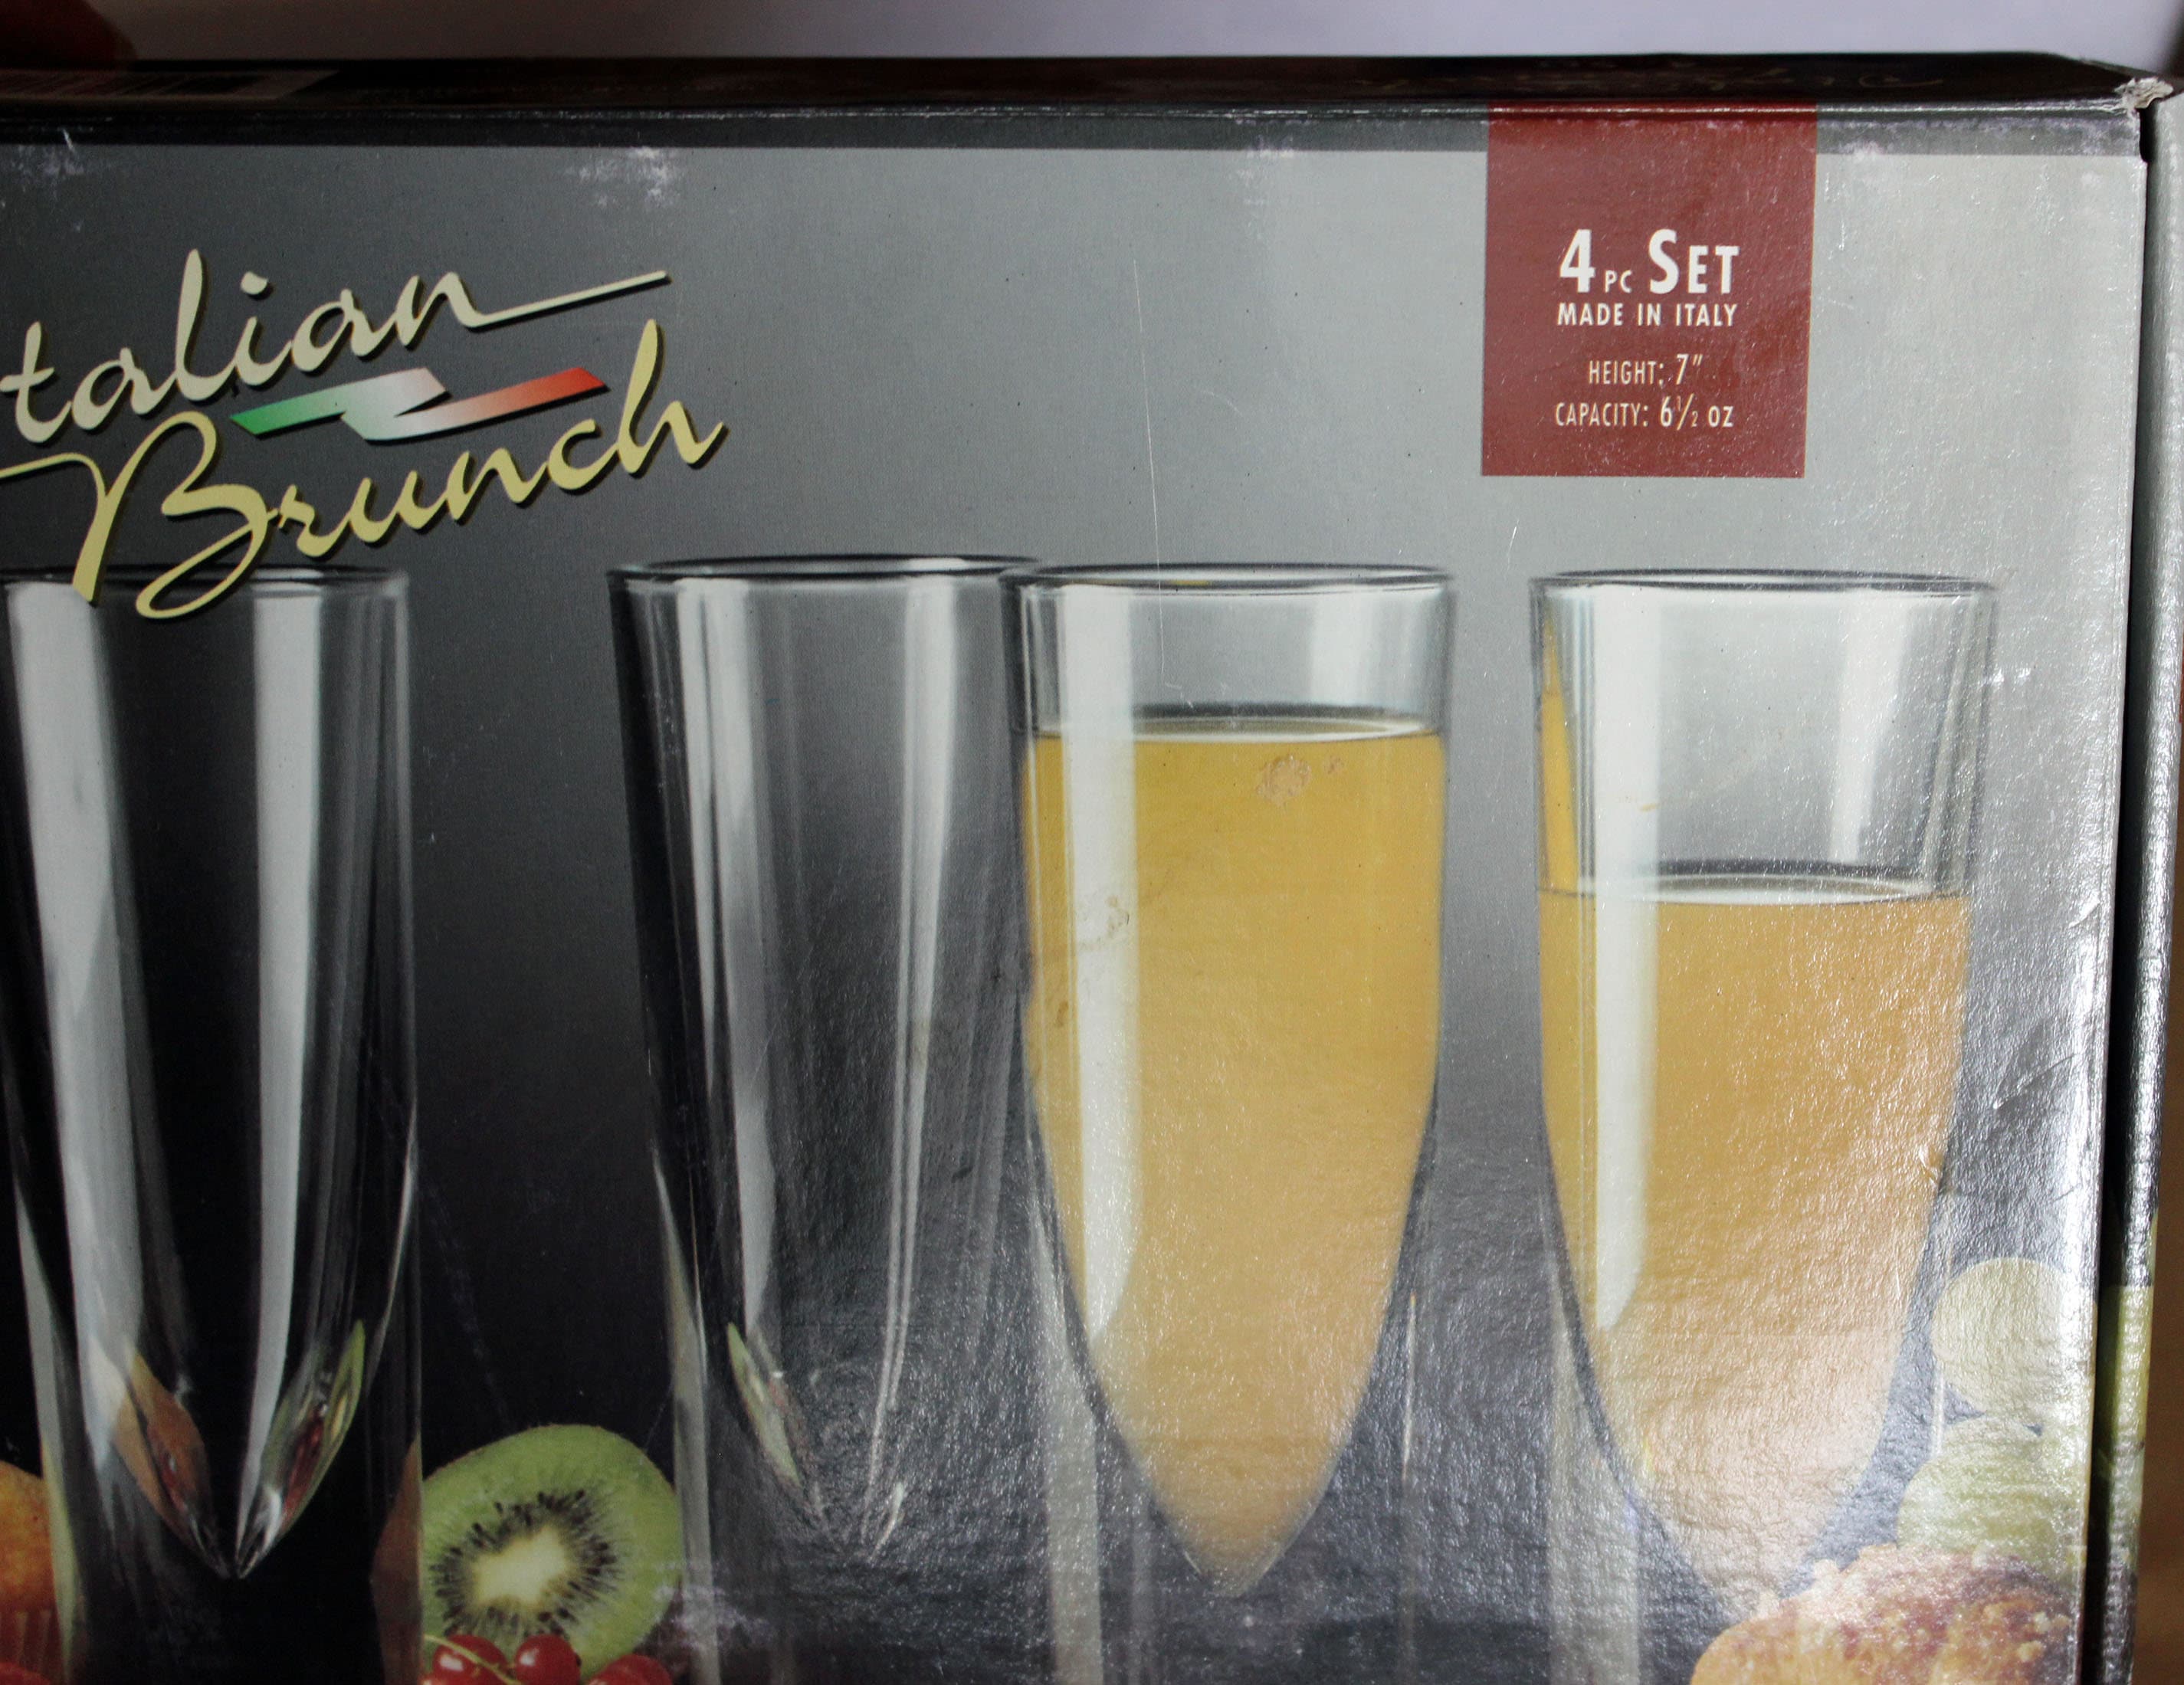 Made In Cookware - Stemmed Beer Glasses - 14 oz - Set of 4 - Italian Made  Crystal Glass - Titanium-Reinforced Stem Italy